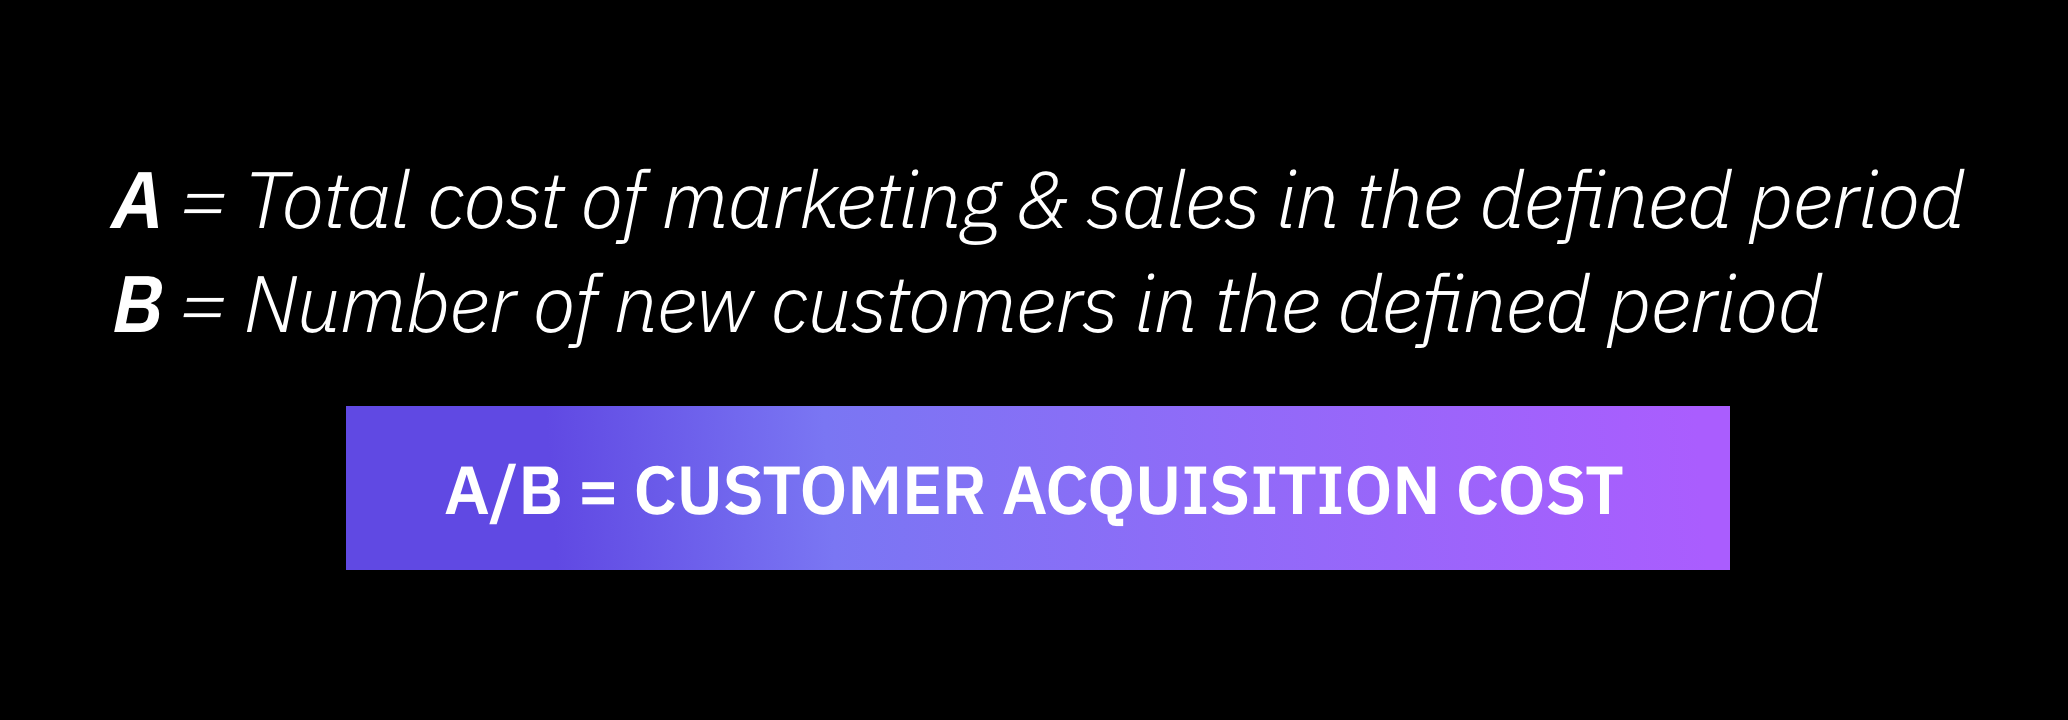 Customer acquisition cost 